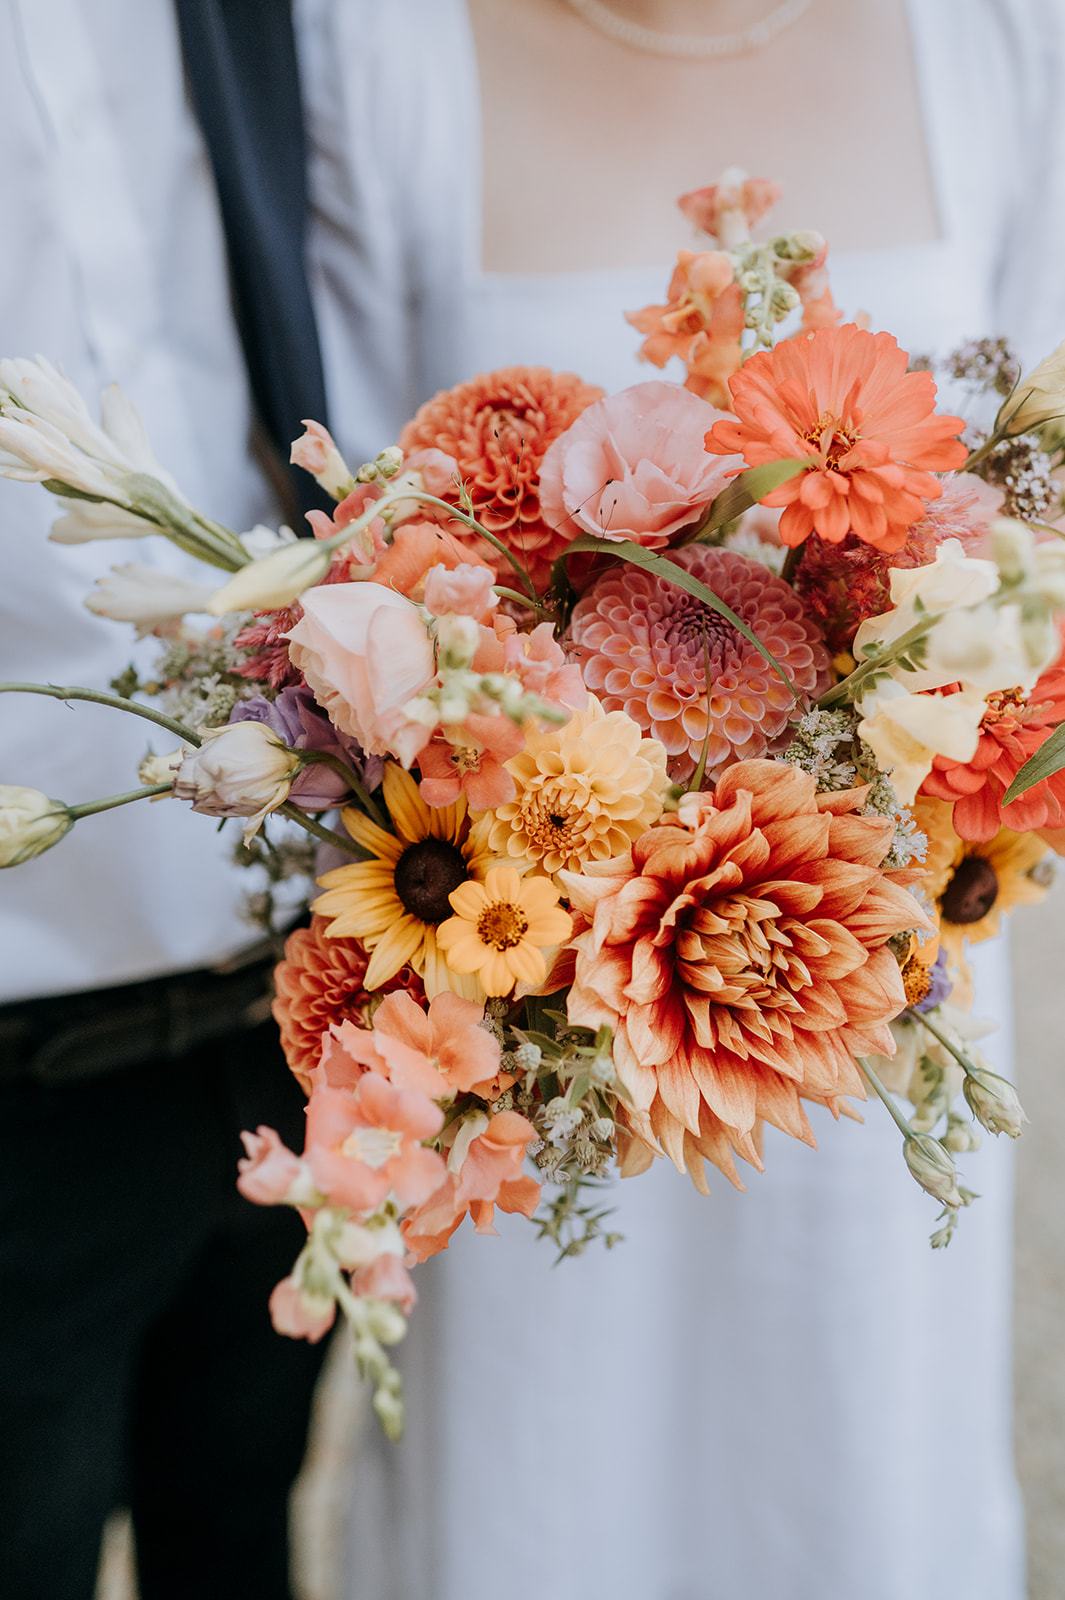 Stunning flowers for an eco-friendly wedding